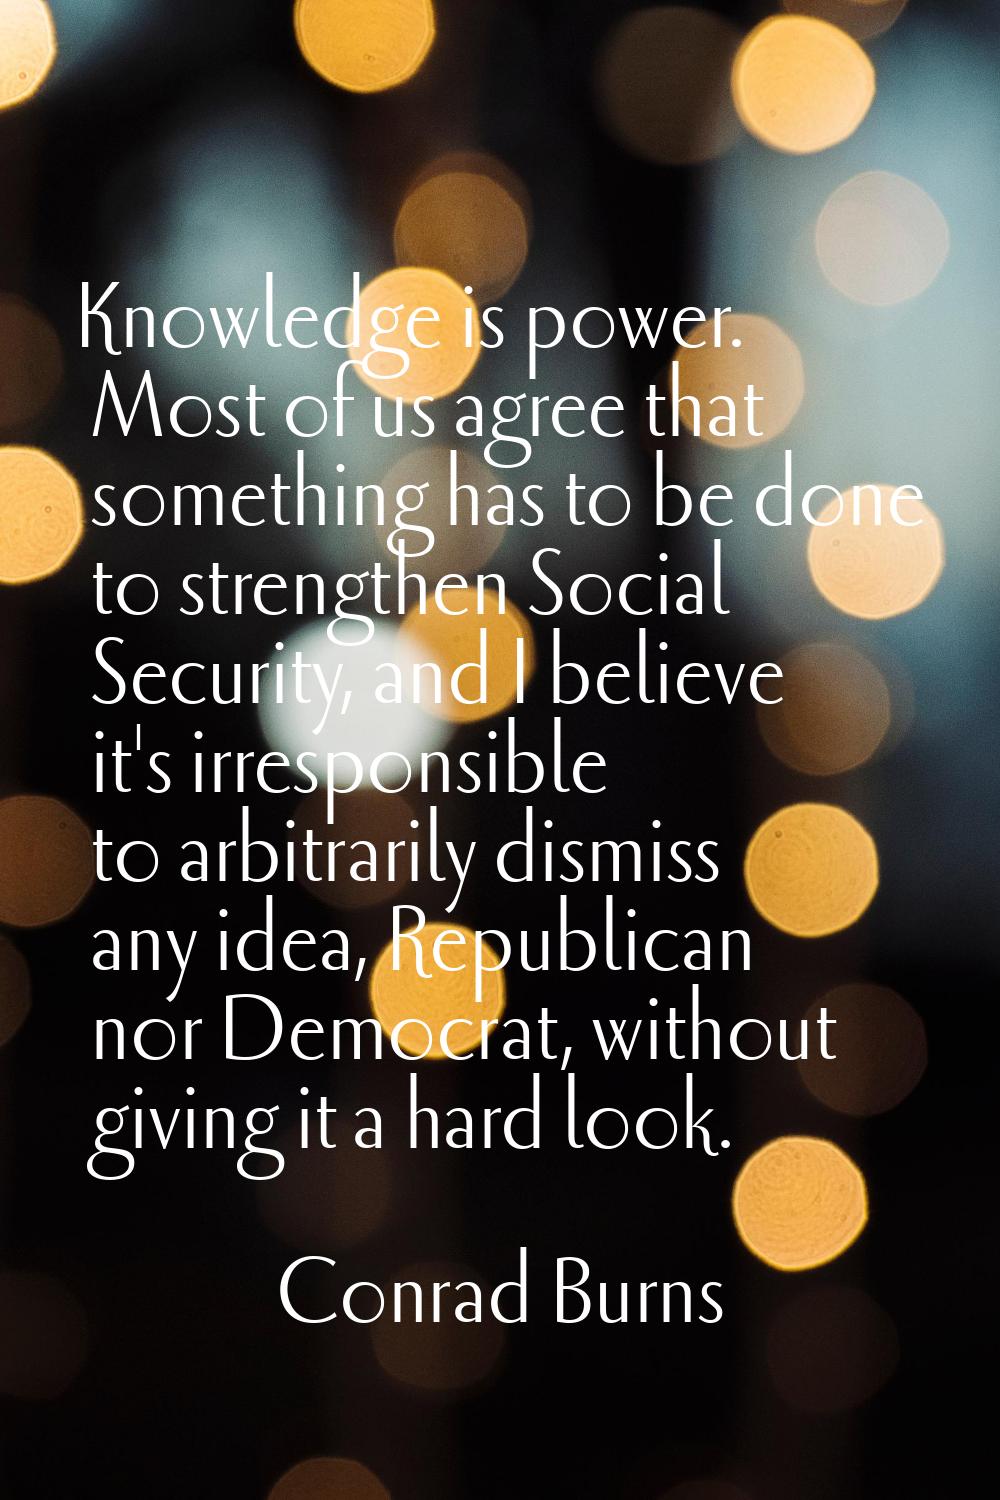 Knowledge is power. Most of us agree that something has to be done to strengthen Social Security, a